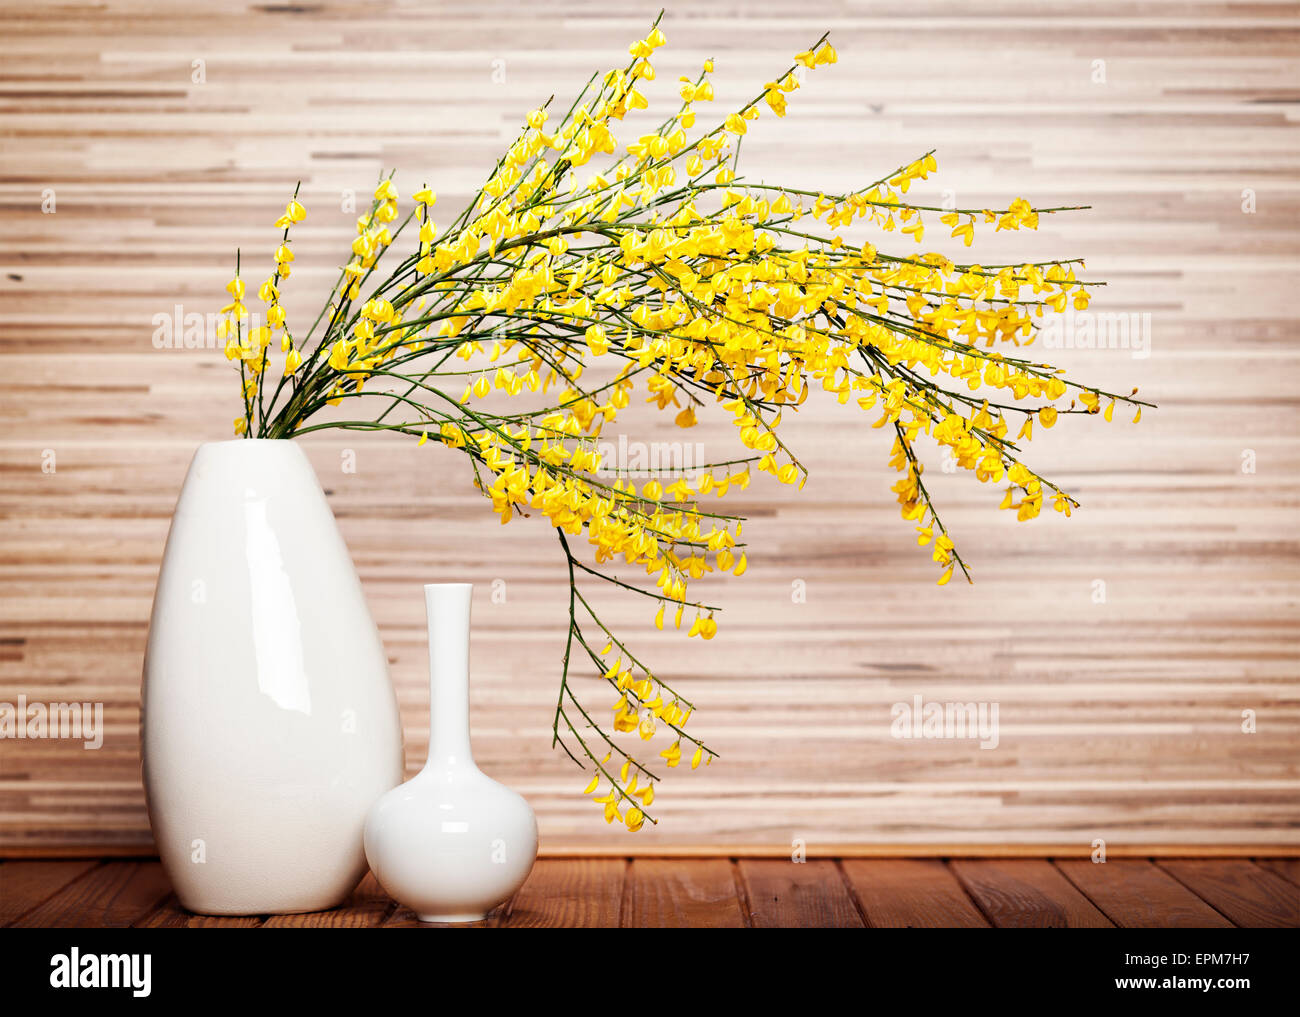 Still life with French Broom branch in a vase Stock Photo